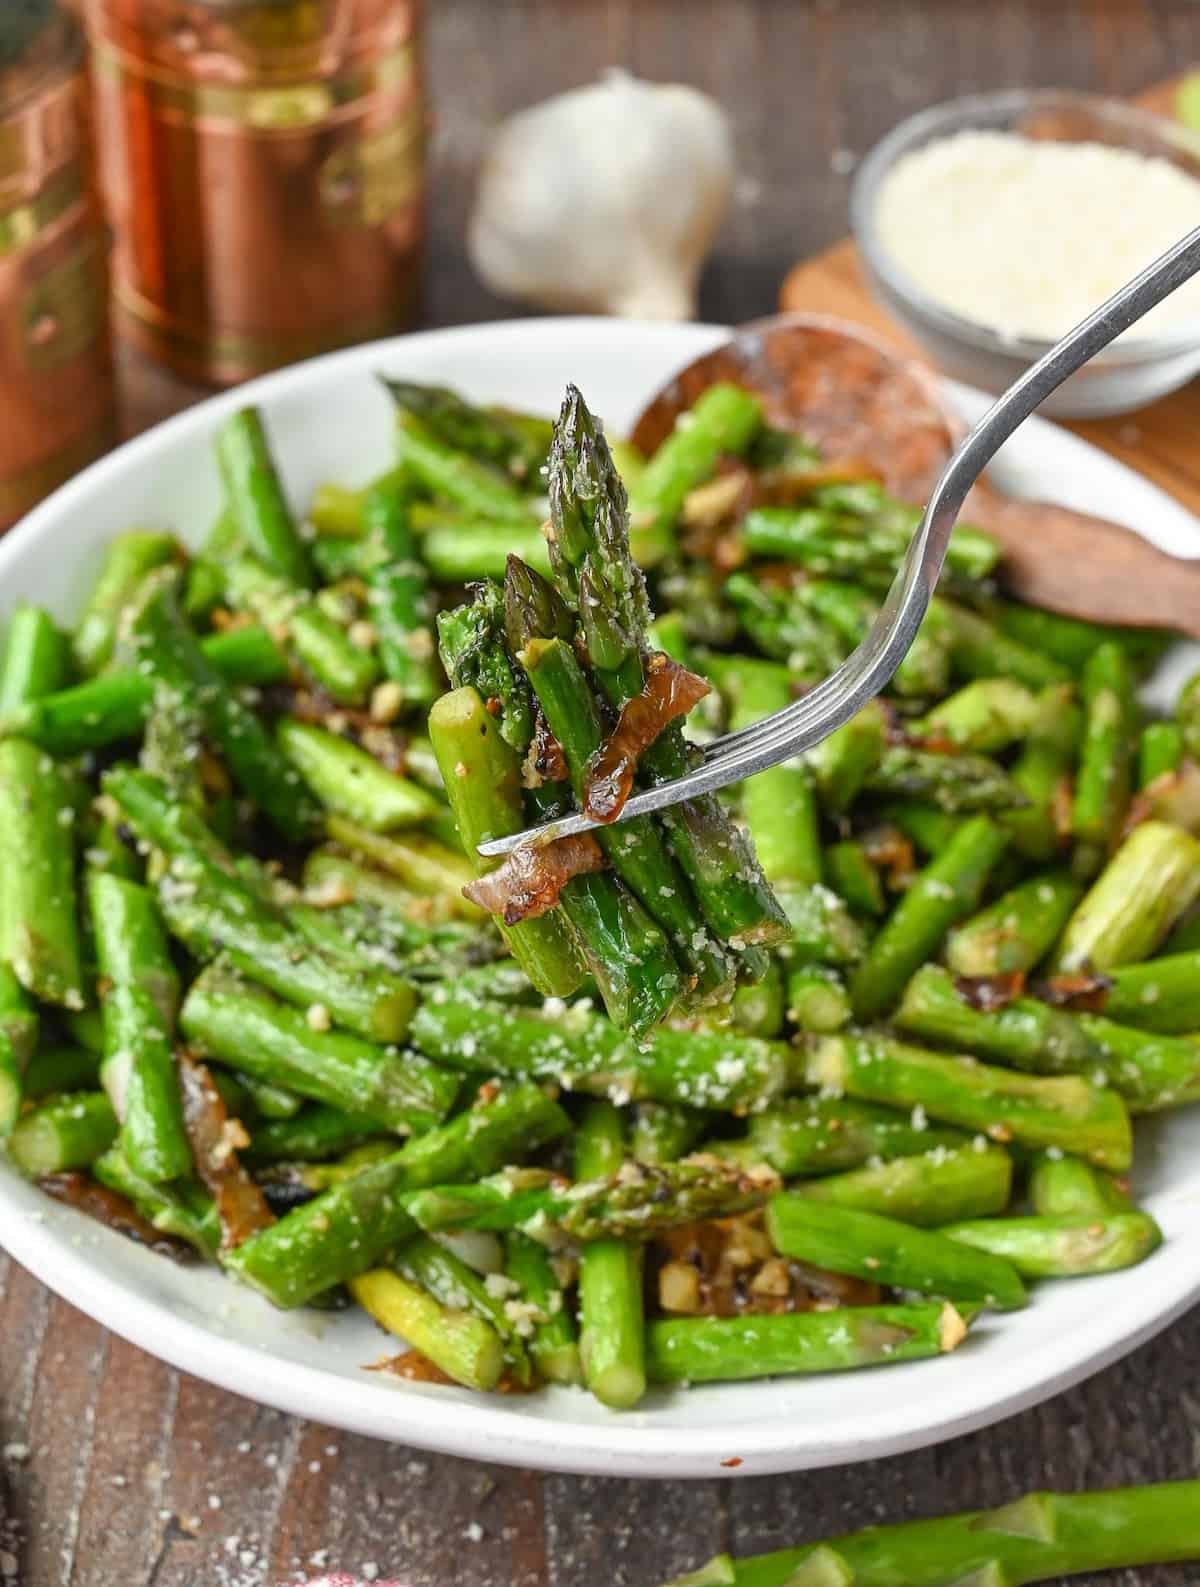 A fork picking up a bite of asparagus.